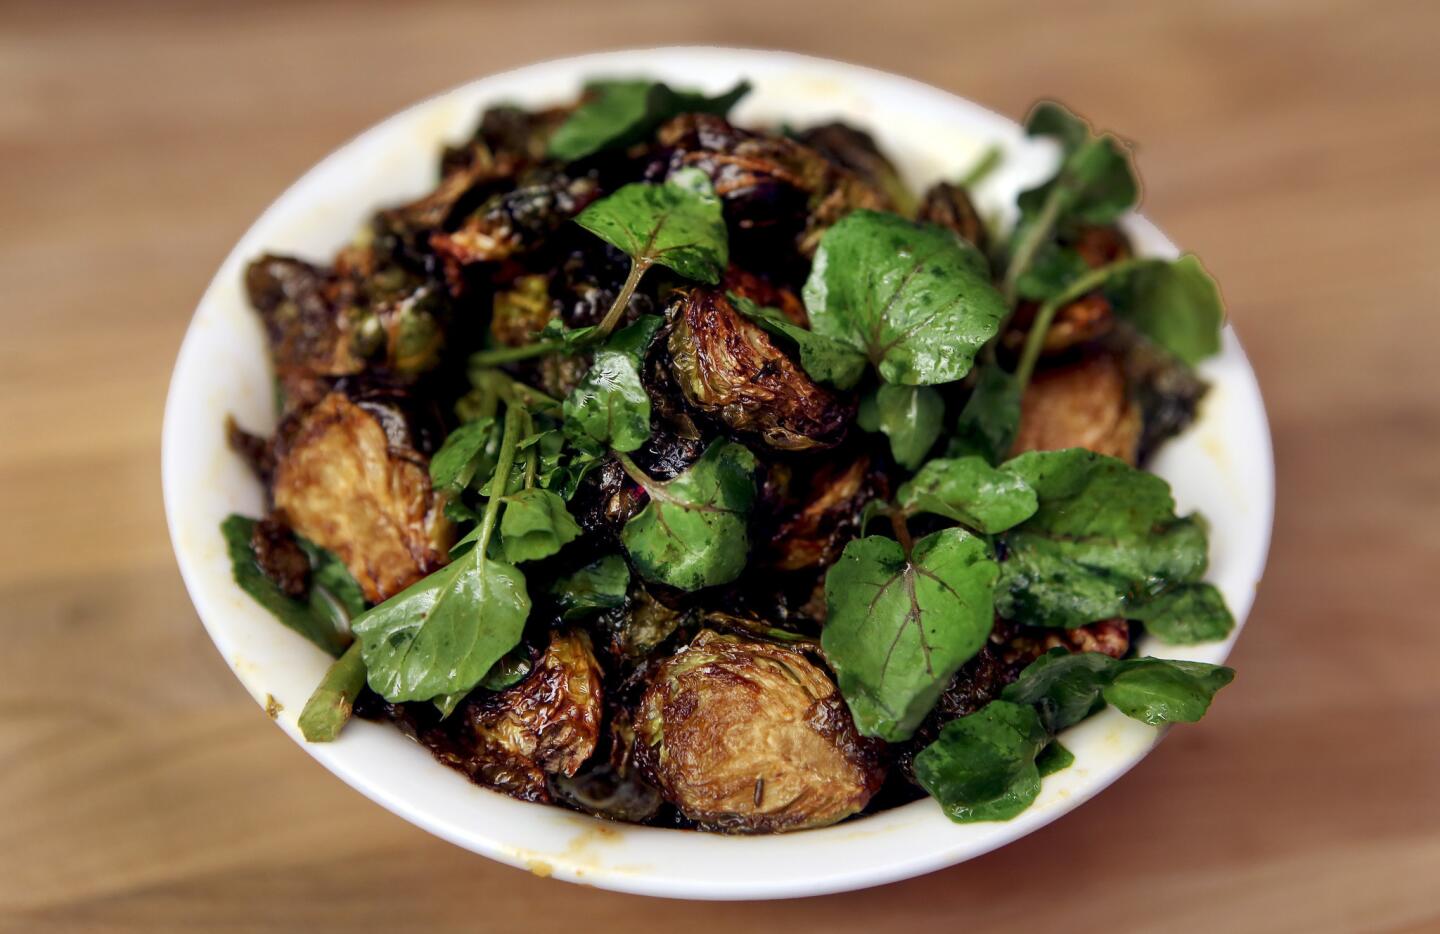 Sweet & Spicy Brussels Sprouts are made with garum, pecans and garlic confit. Perhaps because of their Australian origins, restauranteur Jud Mongell and chef Ken Addington often garnish their dishes with nuts.